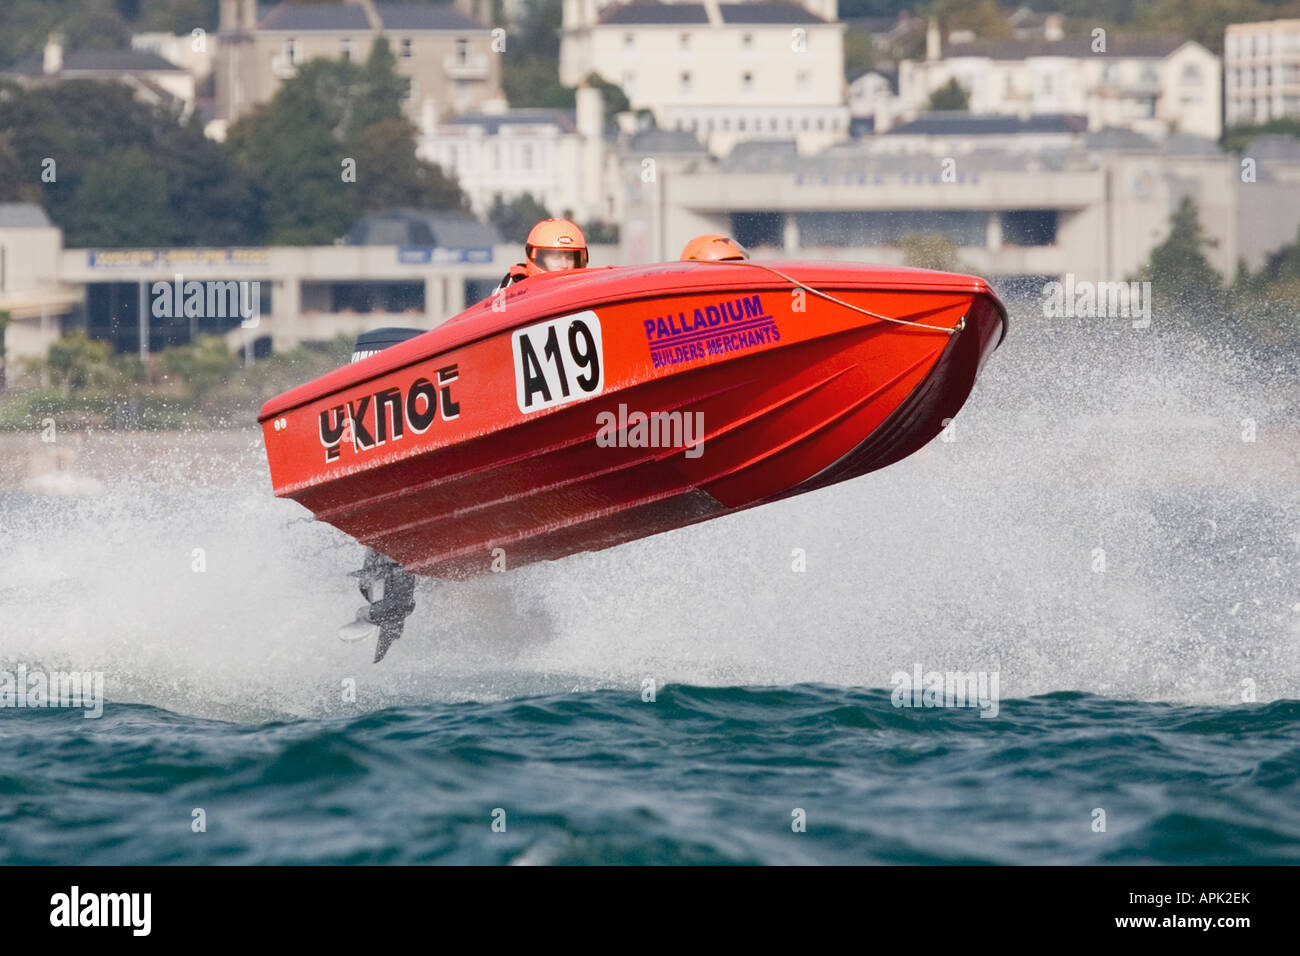 Circuito Offshore Powerboat Racing " Ynot' n. A19 Racing a Torquay Inghilterra England Foto Stock